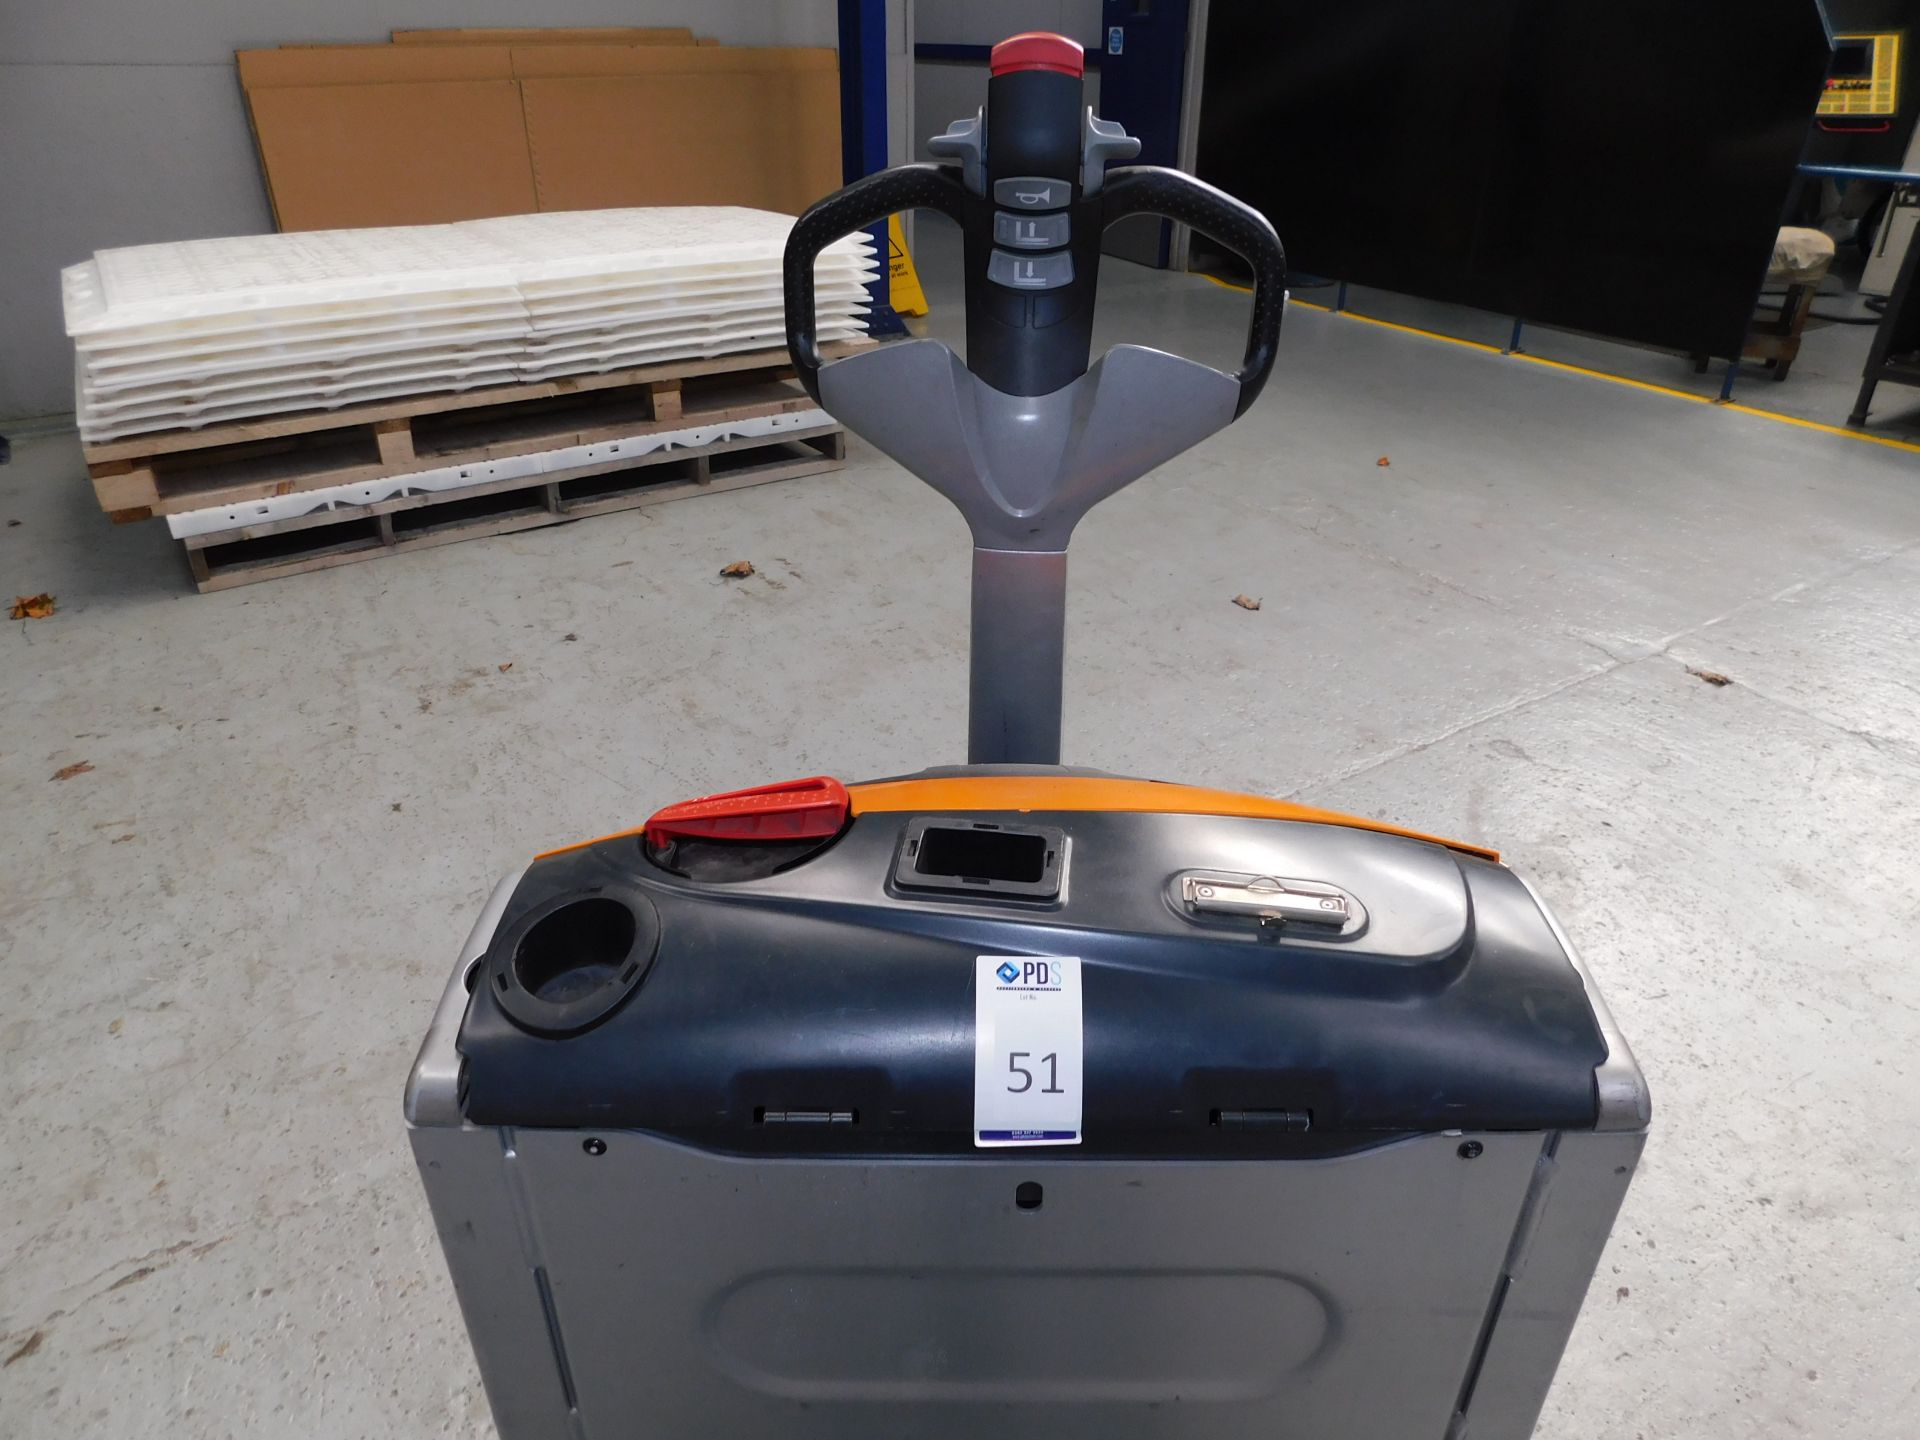 2012 Still EXU16, Long Reach Pedestrian Operated Electric Pallet Truck, Serial No W40153C01544, - Image 3 of 6